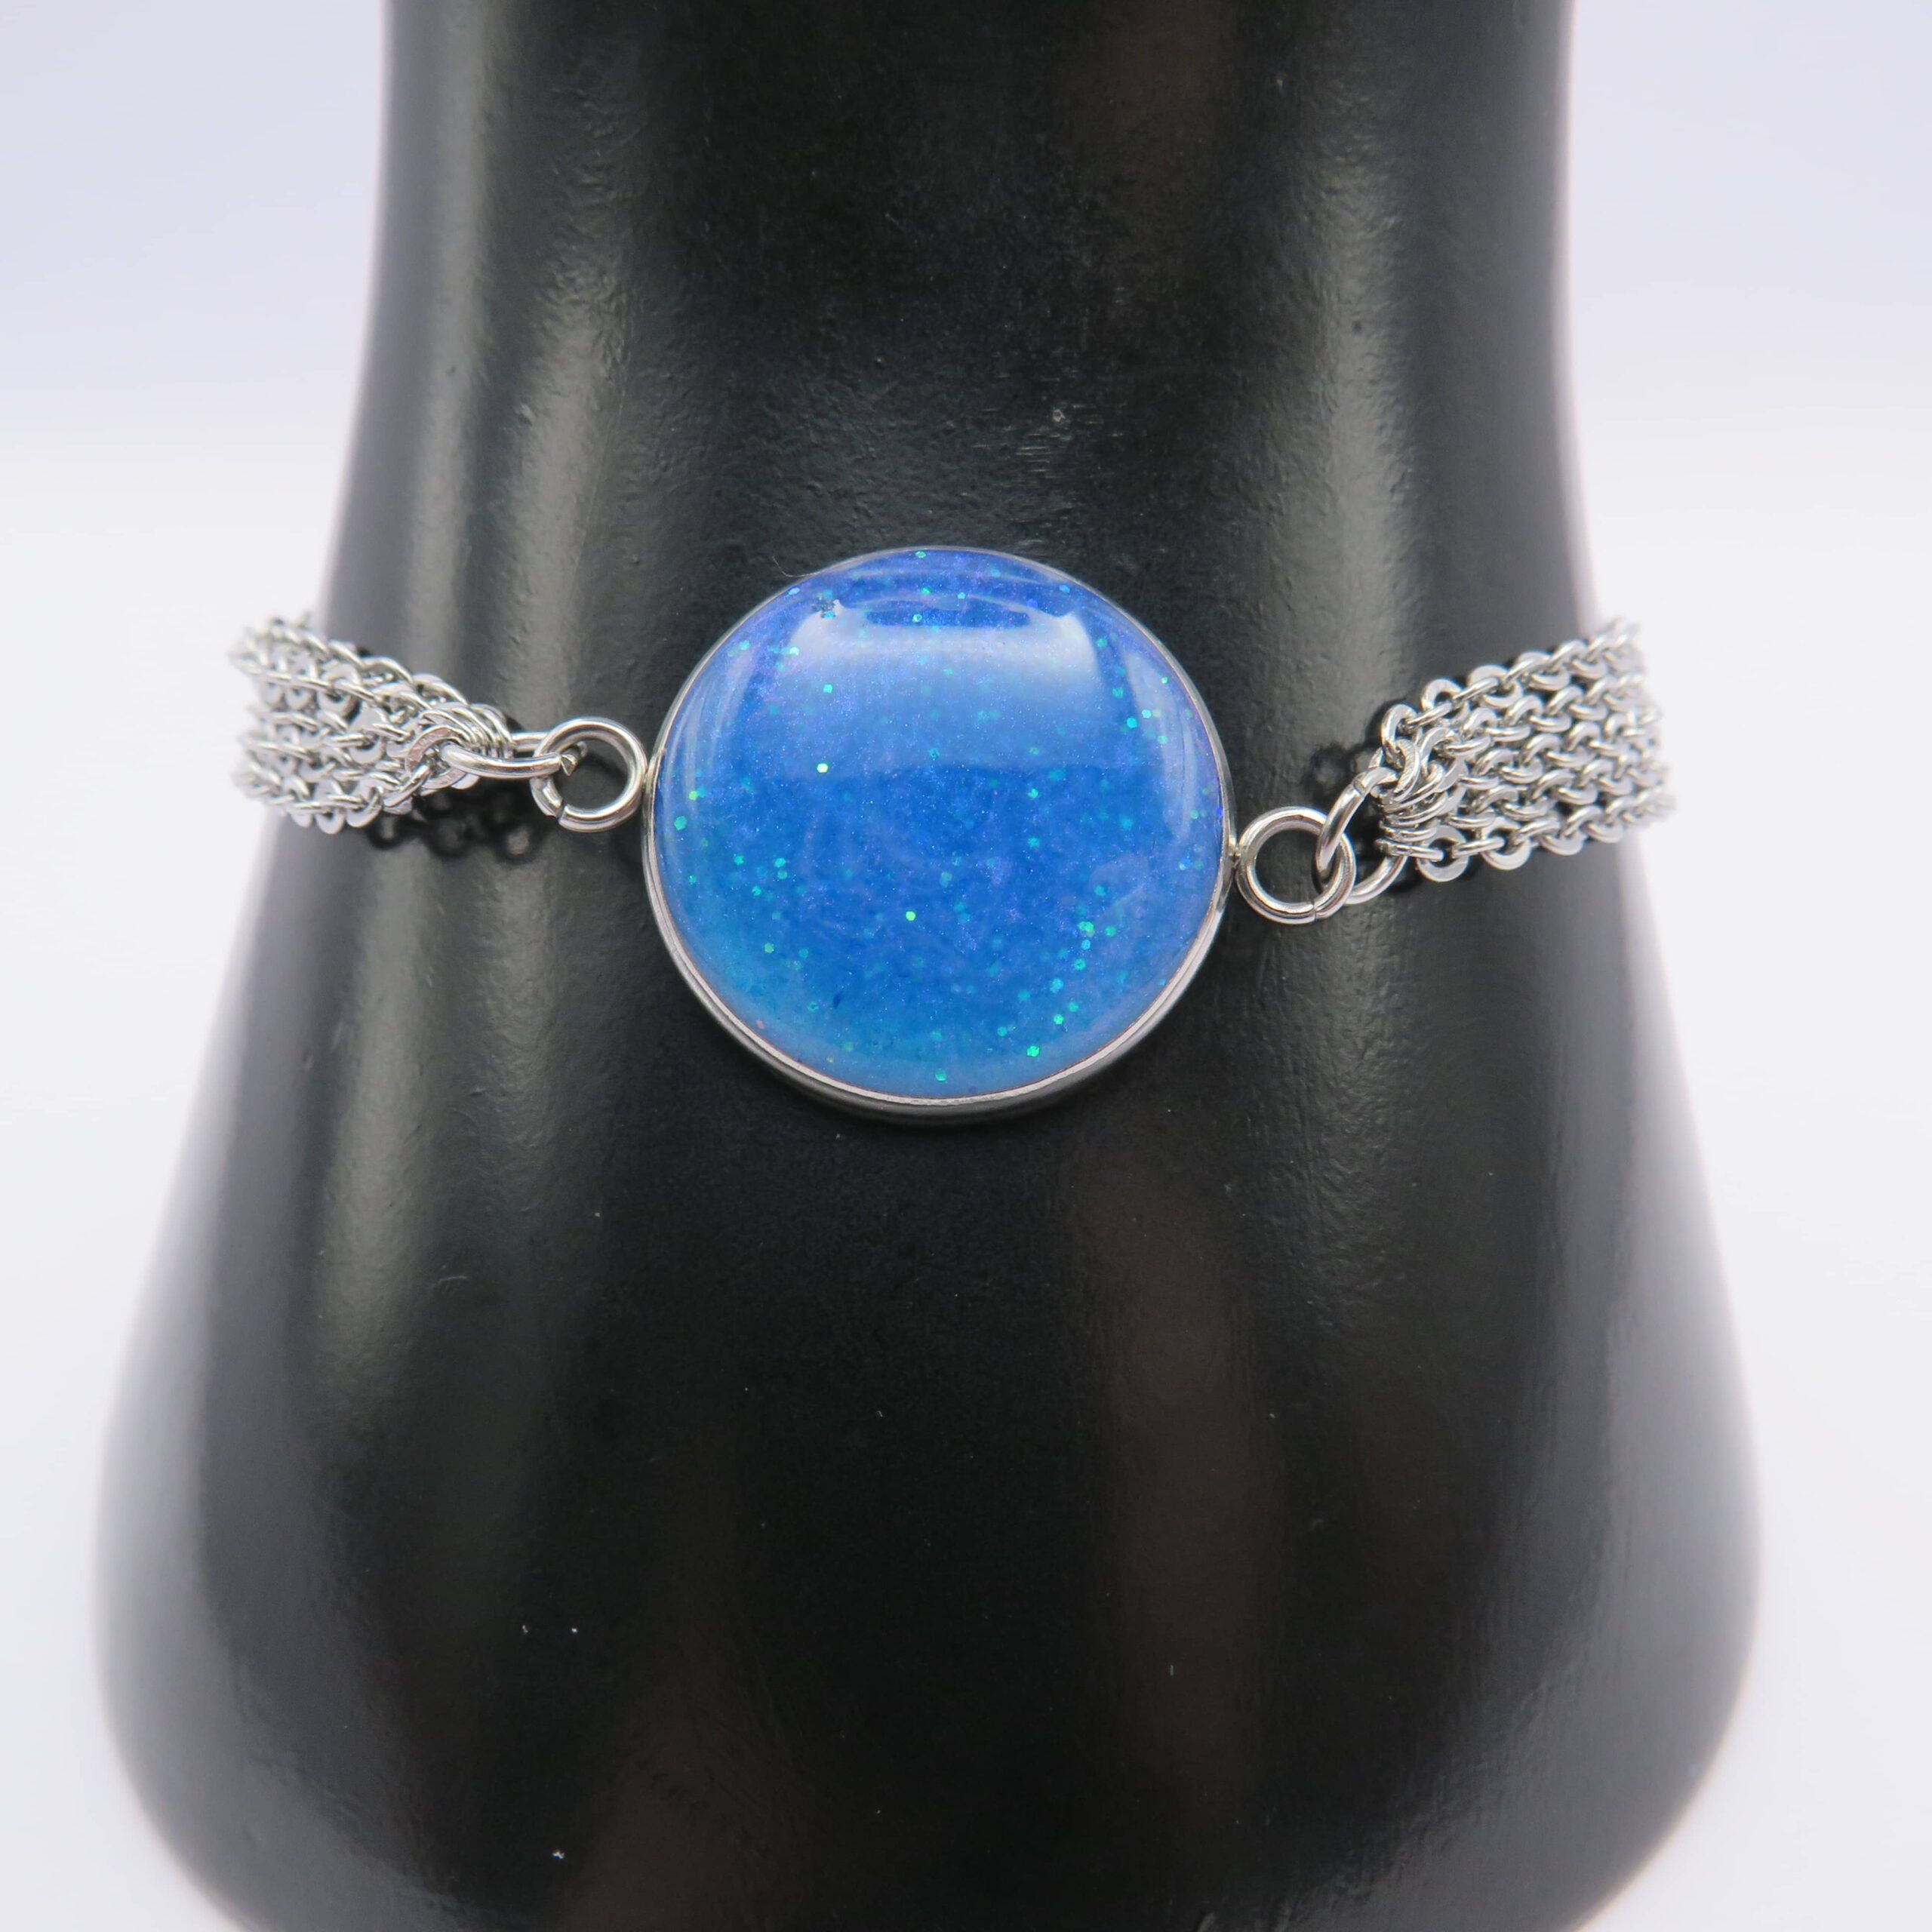 Stainless Steel Blue Cabochon Chain Bracelet